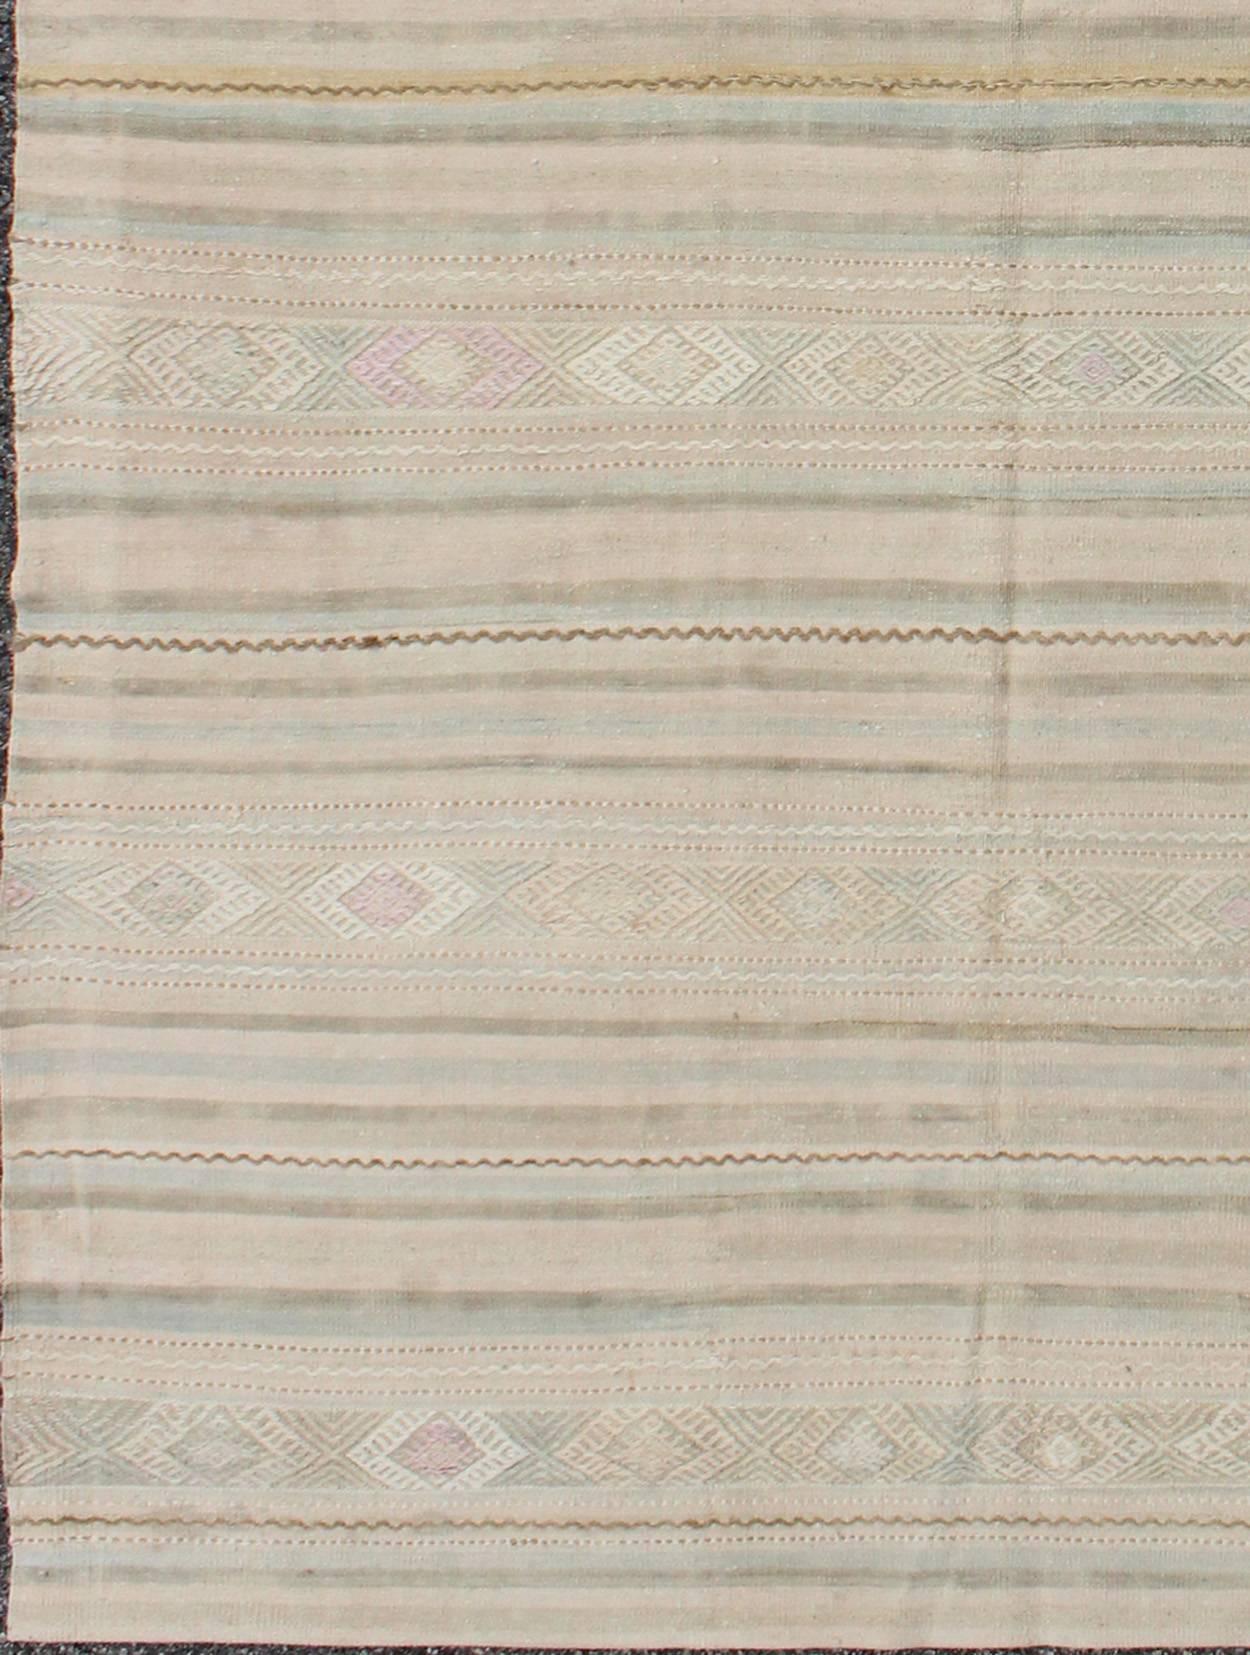 Vintage Turkish Kilim rug with neutral horizontal stripes and geometric designs, rug en-165650, country of origin / type: Turkey / Kilim, circa 1950

Featuring geometric shapes rendered in a repeating horizontal stripe design, this unique